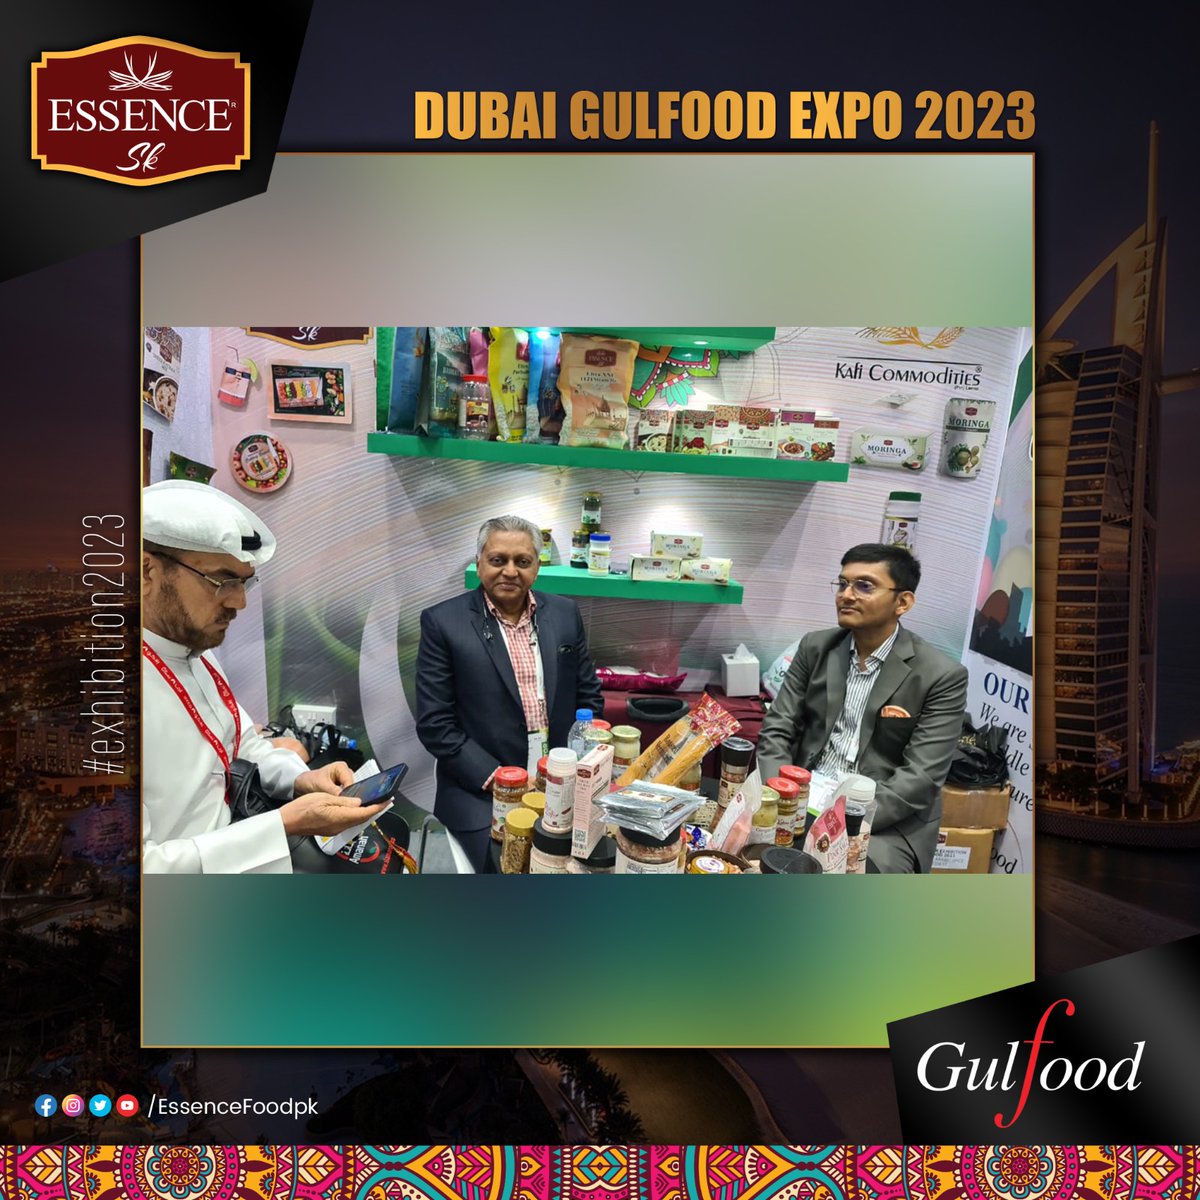 Our stall had been bustling at Day 3rd & 4th.

We are delighted to engage with many visitors from all around the world!

It's still few hours left to visit our stall on 5th & last day at Gulfood.

#pakistan #dubai #gulfood #gulfood2023 #uae #madeinpakistan #emergingpakistan